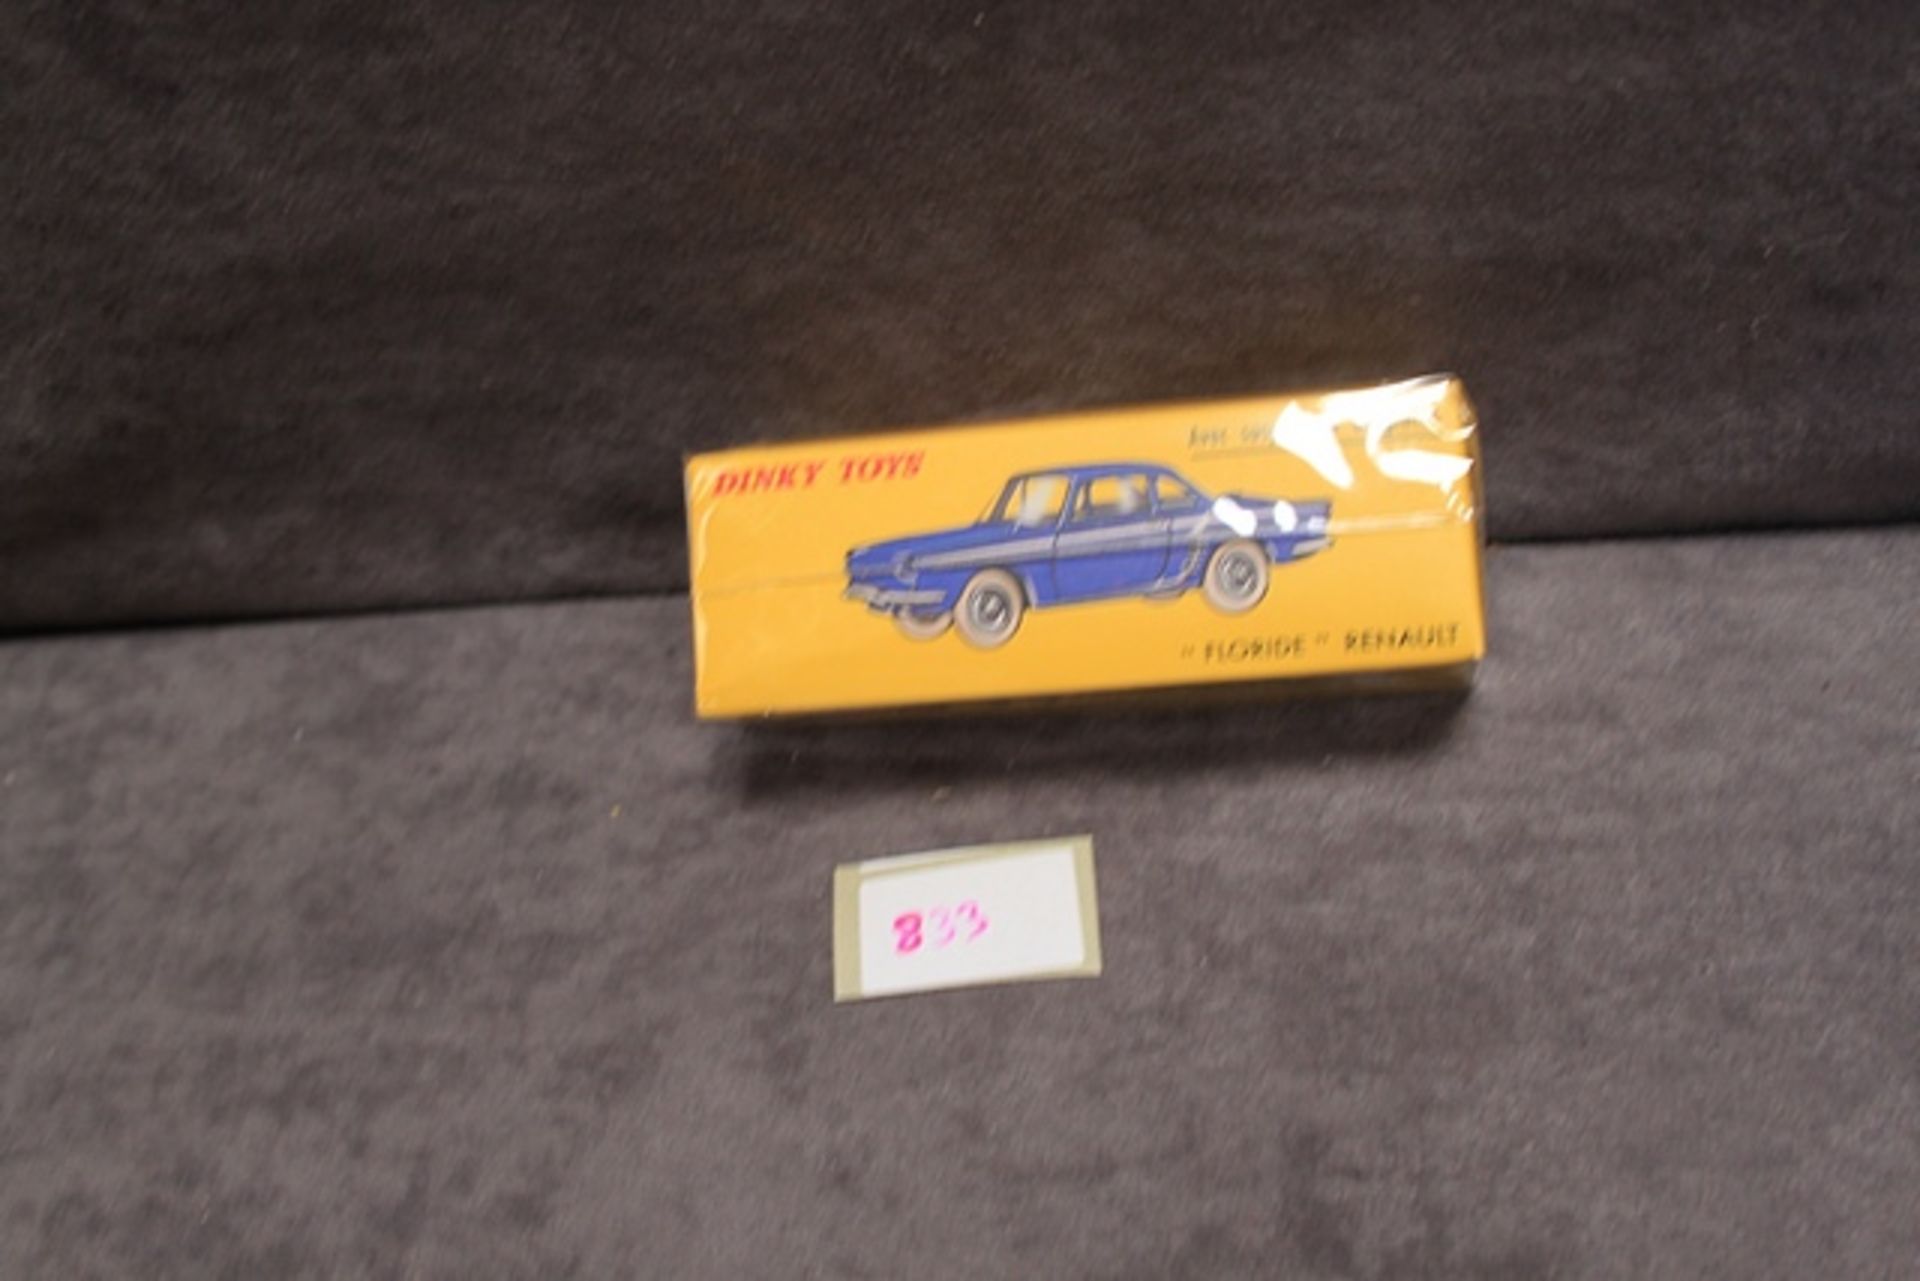 Atlas Mint Dinky Toys diecast #543 Floride Renault in a mint box in celophane